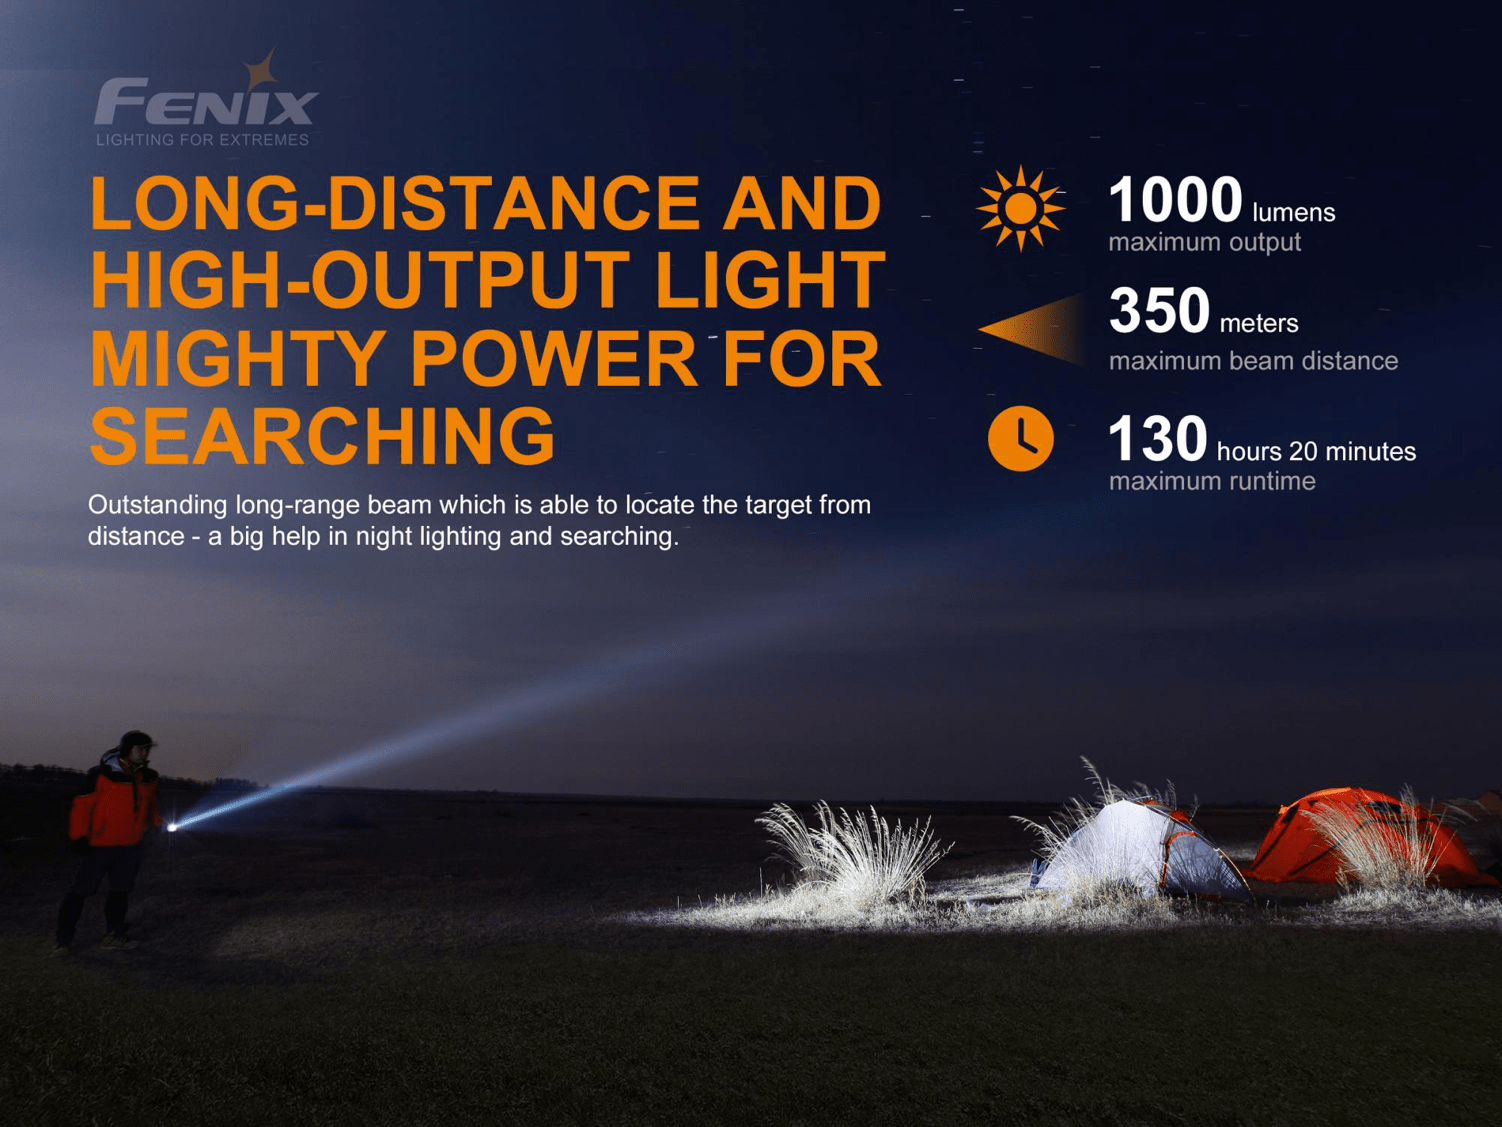 Fenix LD42 LED Torch, 1000 Lumens Powerful Compact Flat Body grip AA Battery Torch light, Everyday Carry work Flashlight for Inspection Searchlight Outdoors Camping Hiking Light 